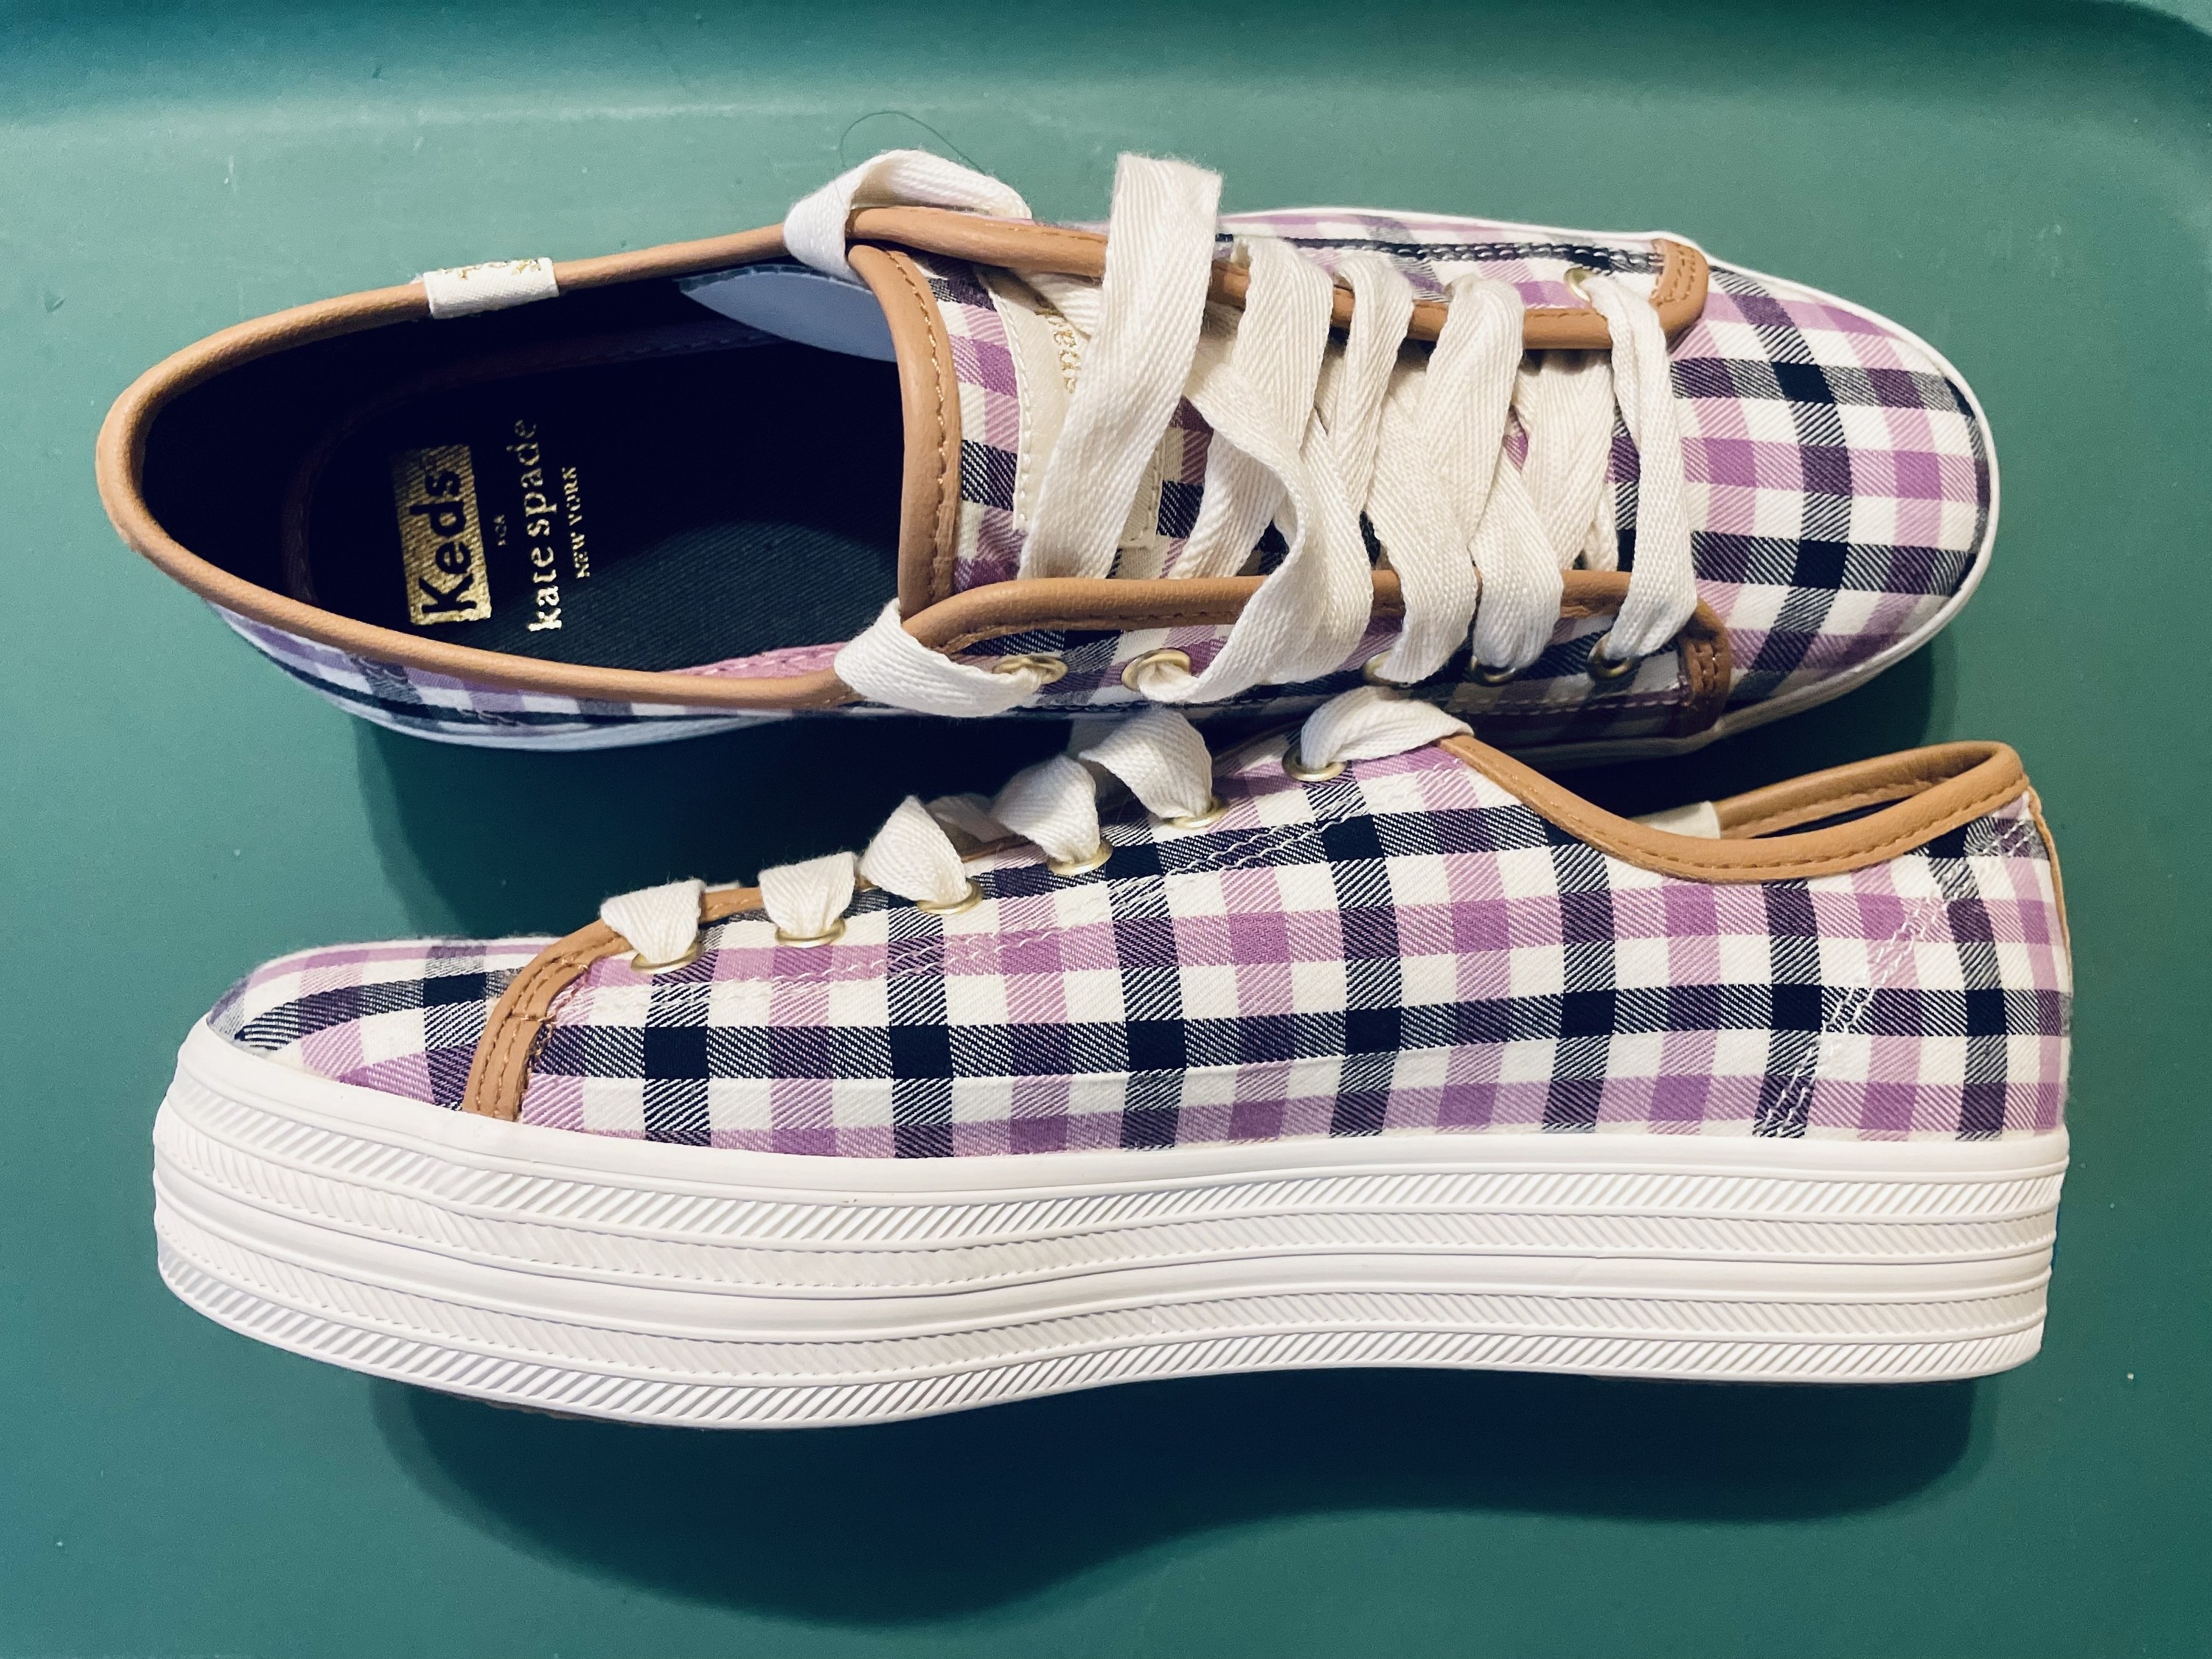 the purple and blue plaid sneakers with brown leather trim and white platform sole